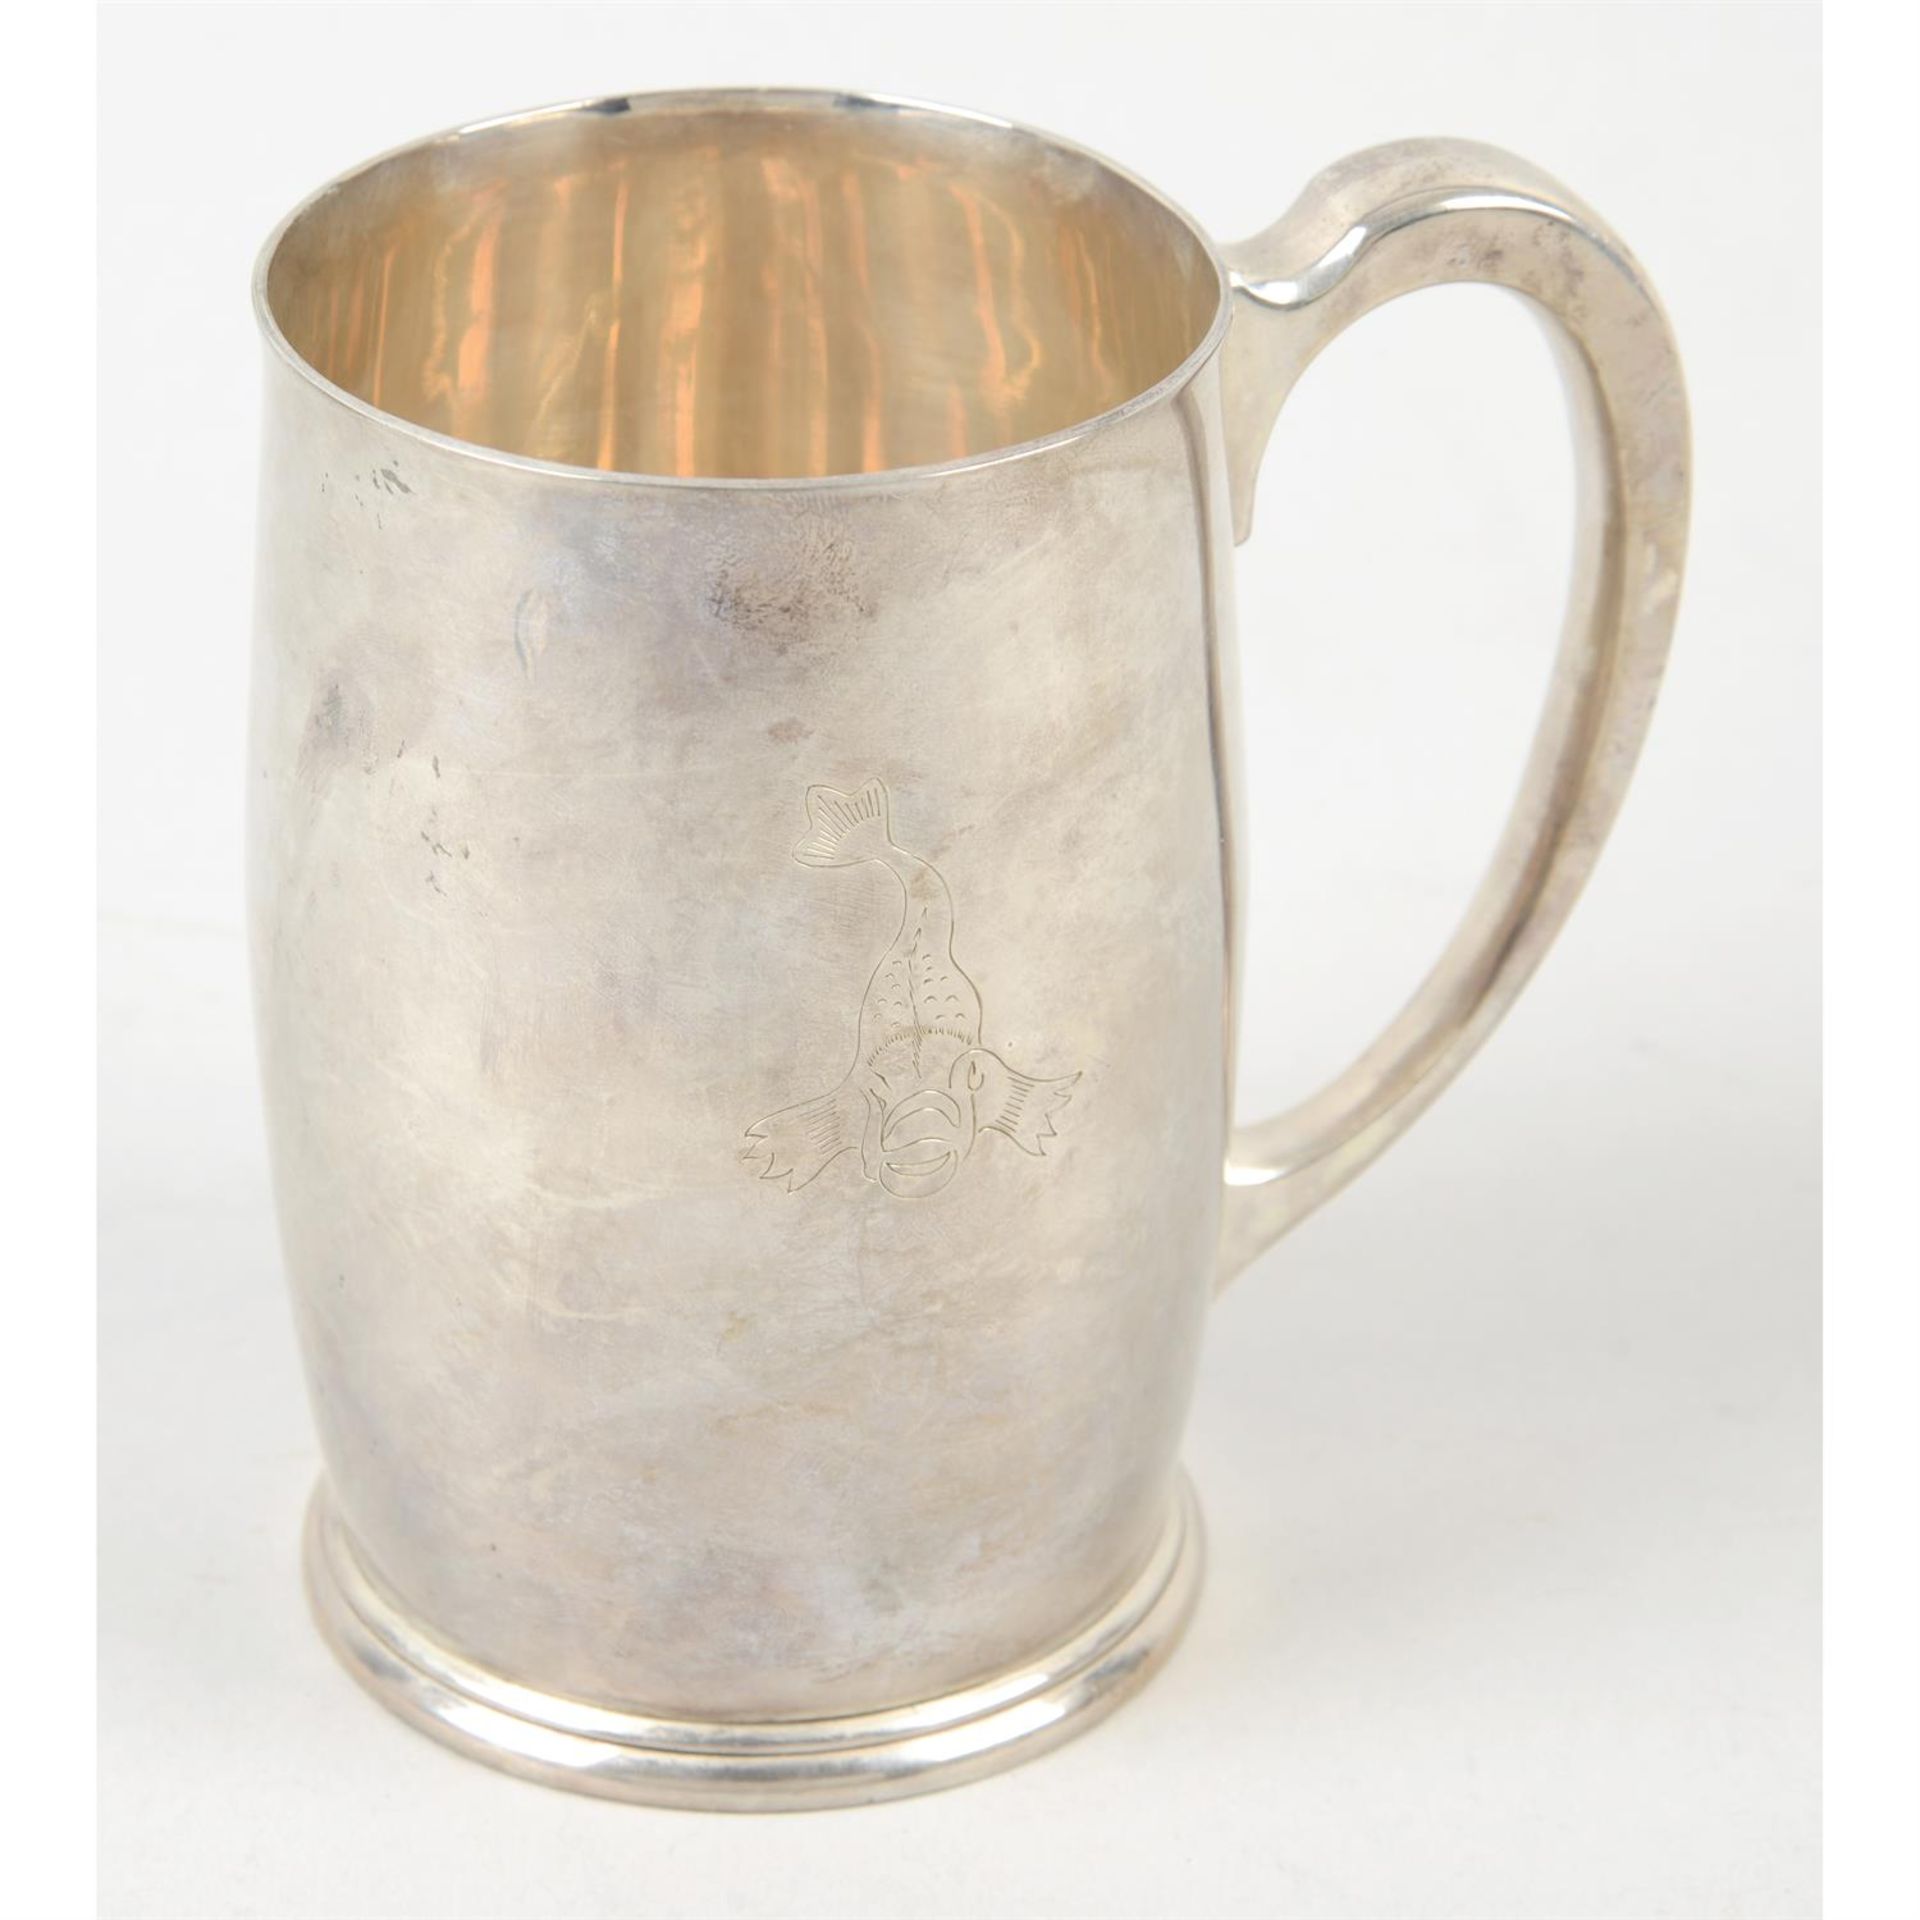 A mid-20th century silver pint mug with dolphin engraving, by Mappin & Webb.